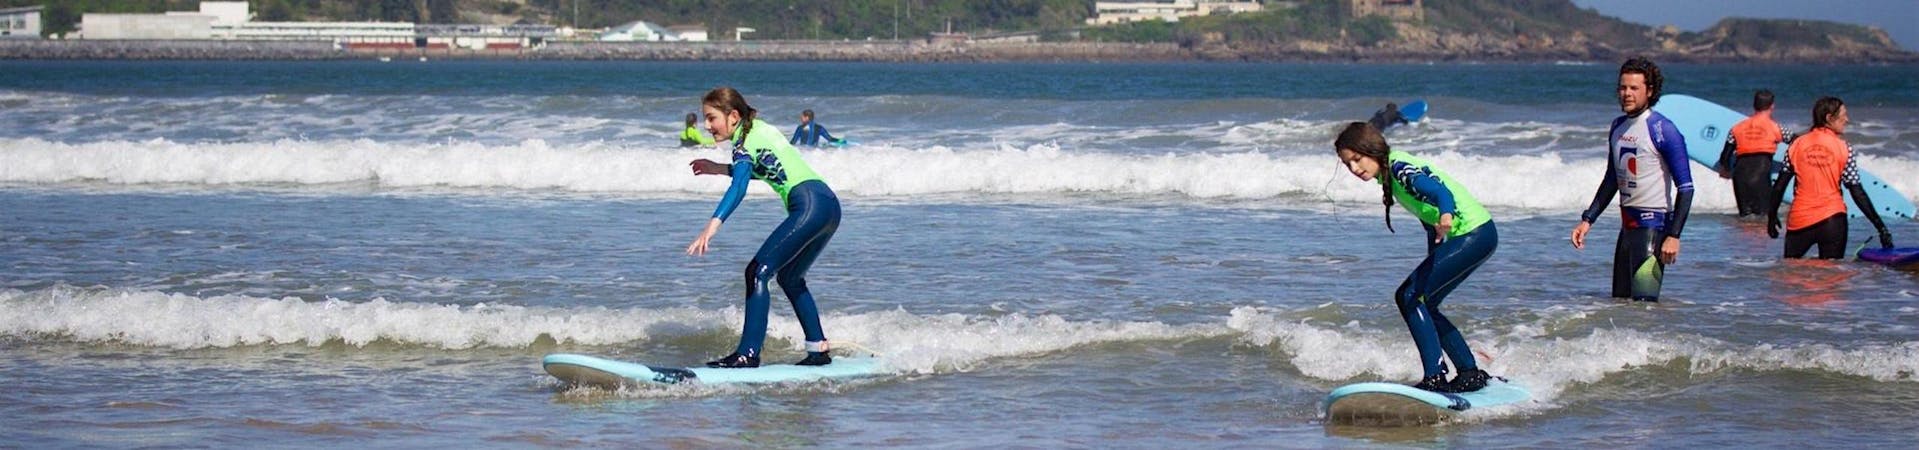 2 young girls are learning how to surf during their Weekend Surf Lessons (from 7 y.) on Hendaye Beach with Gold Coast Surf School Hendaye.